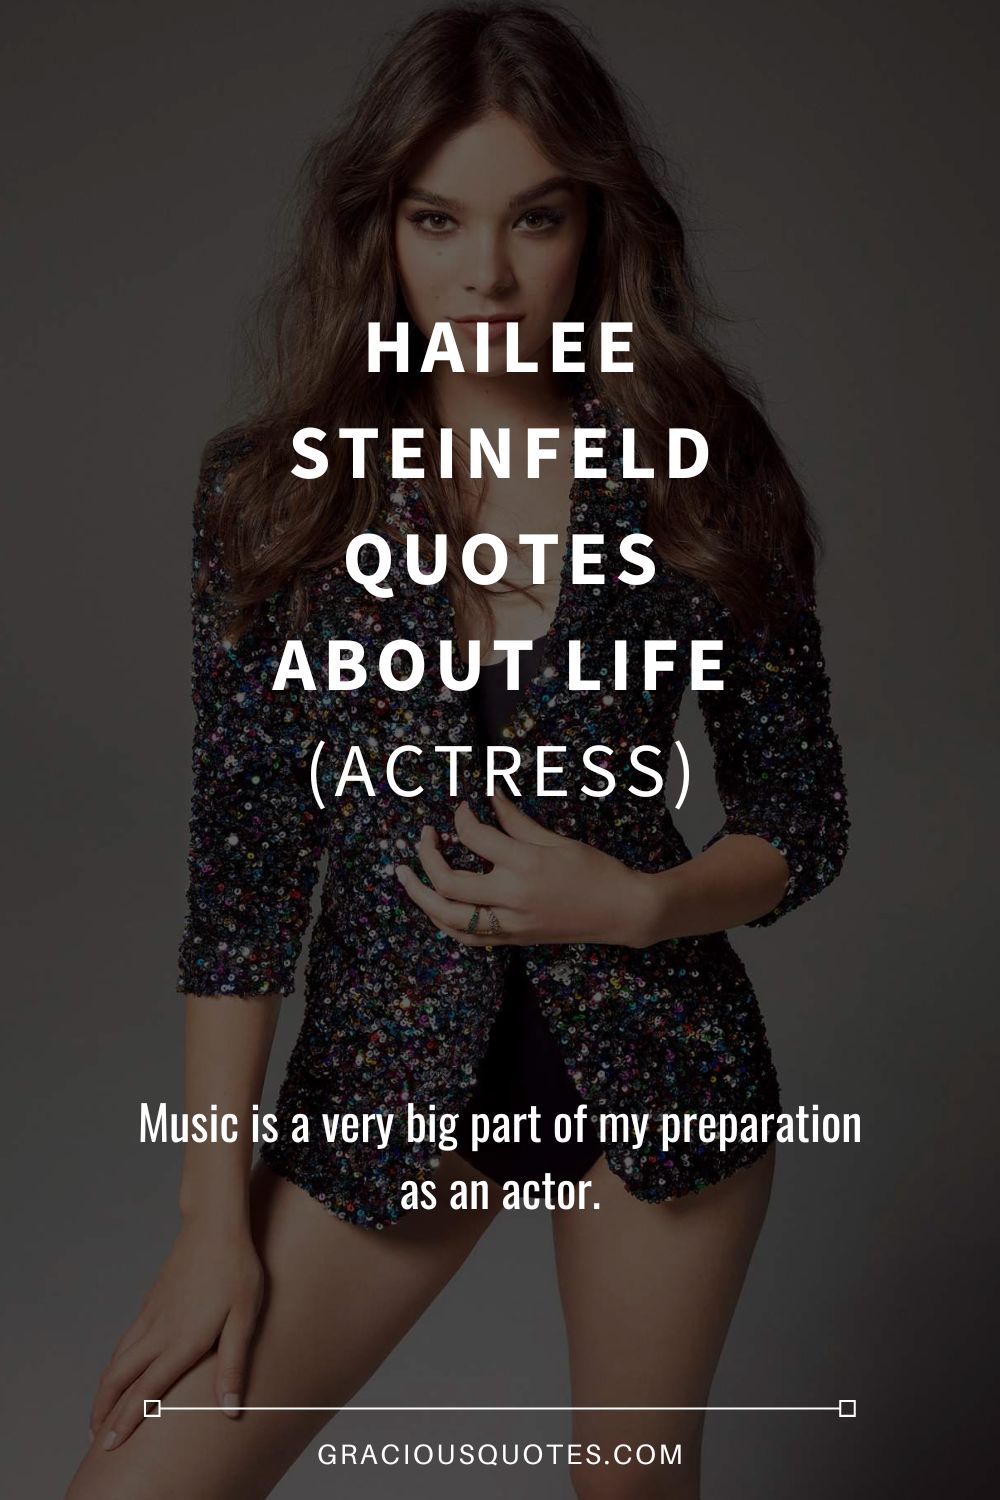 Hailee Steinfeld Quotes About Life (ACTRESS) - Gracious Quotes